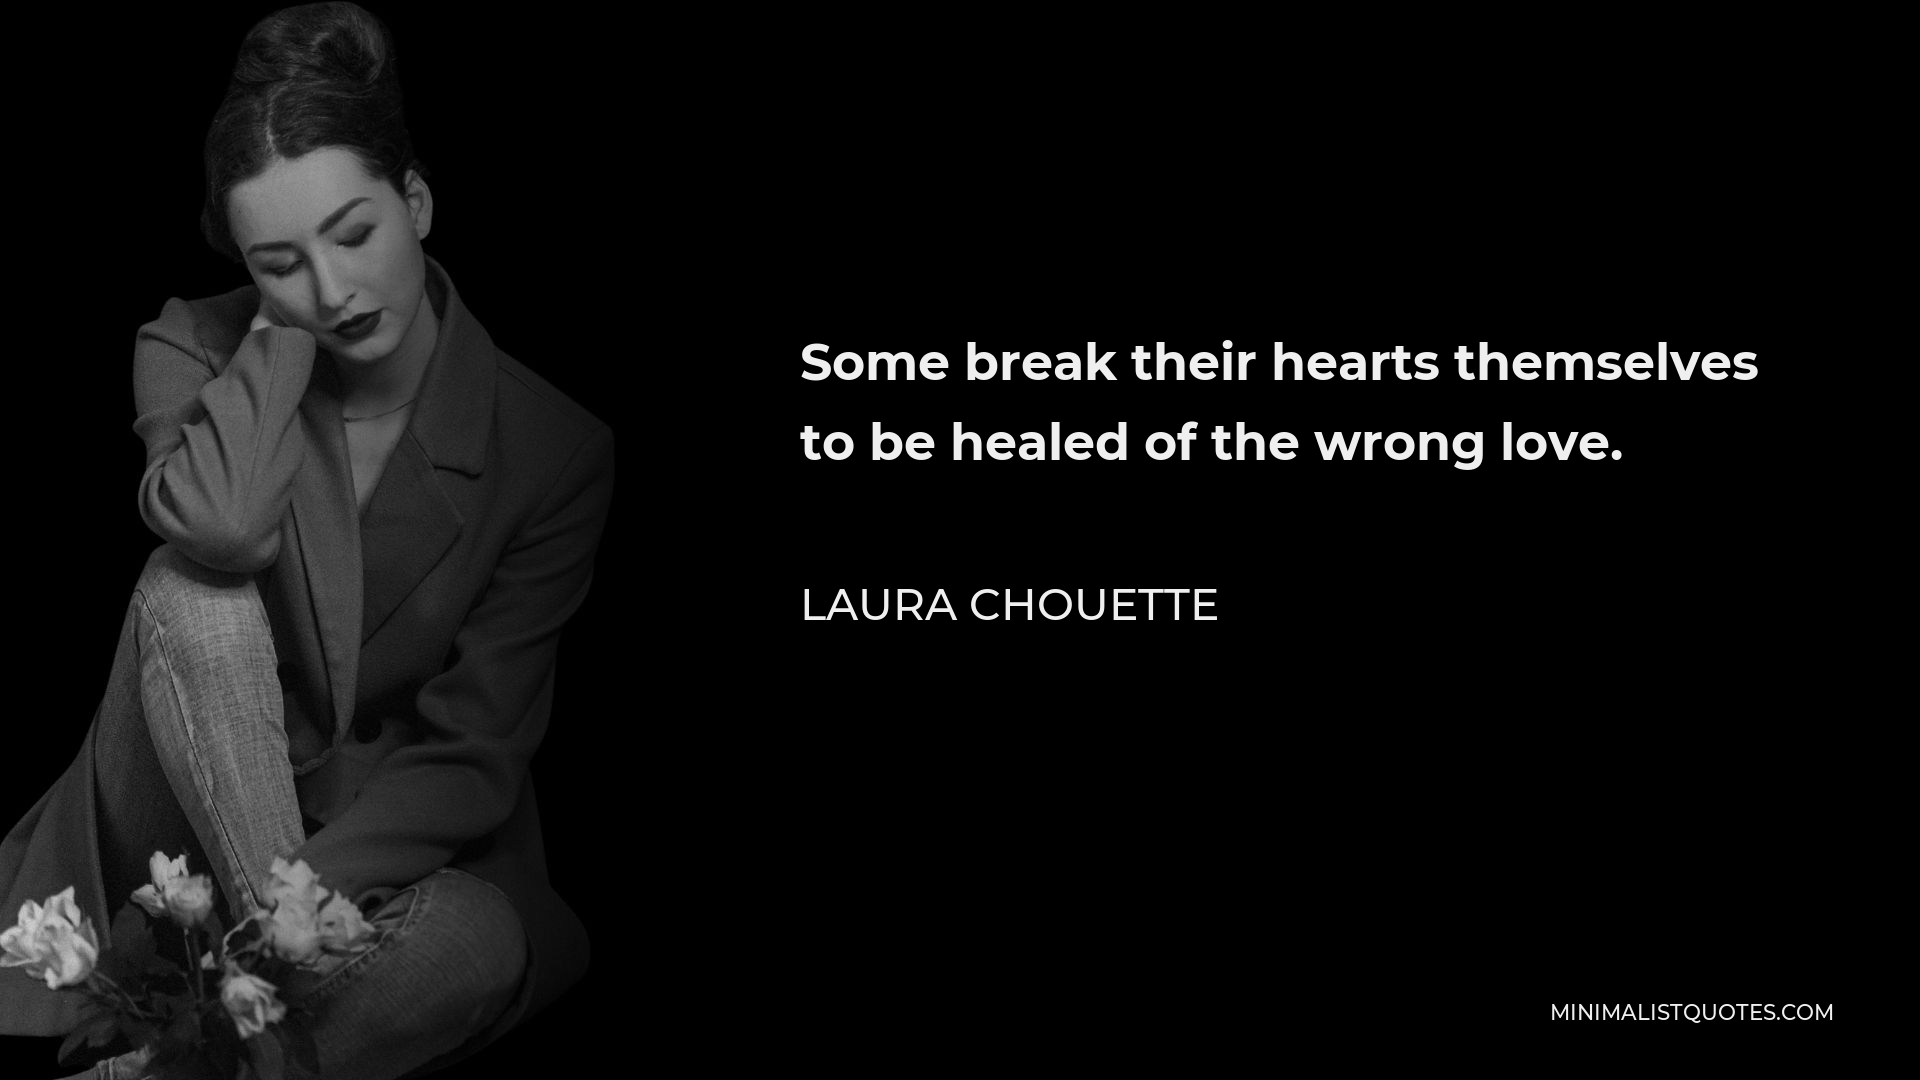 Laura Chouette Quote - Some break their hearts themselves to be healed of the wrong love.